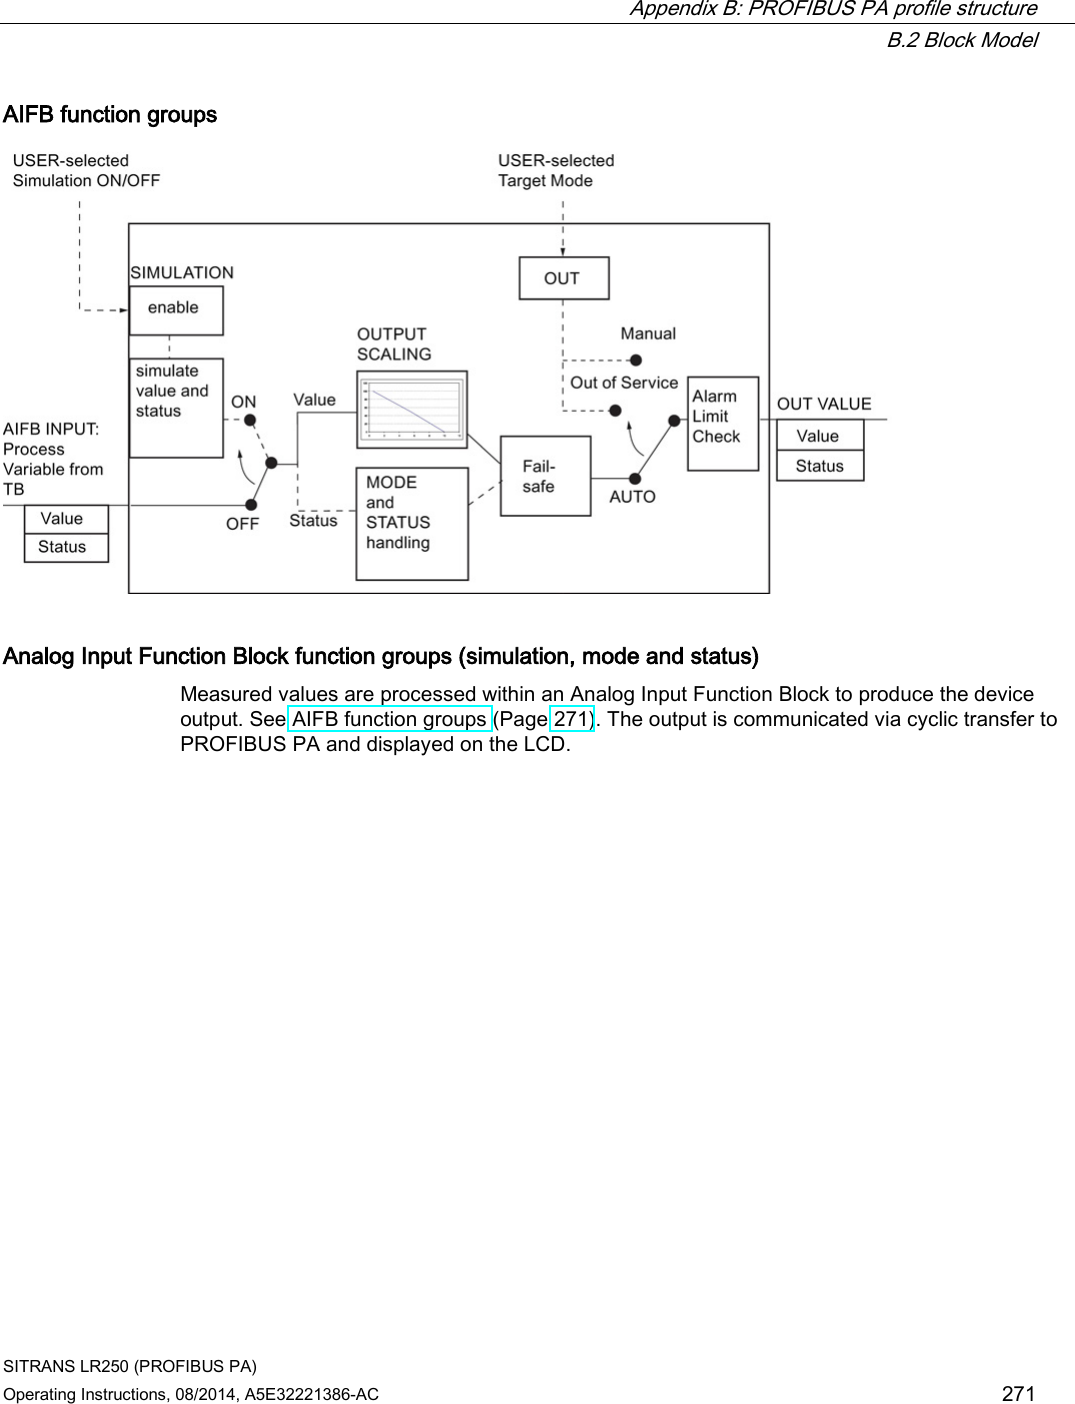  Appendix B: PROFIBUS PA profile structure  B.2 Block Model SITRANS LR250 (PROFIBUS PA) Operating Instructions, 08/2014, A5E32221386-AC 271 AIFB function groups  Analog Input Function Block function groups (simulation, mode and status) Measured values are processed within an Analog Input Function Block to produce the device output. See AIFB function groups (Page 271). The output is communicated via cyclic transfer to PROFIBUS PA and displayed on the LCD. 